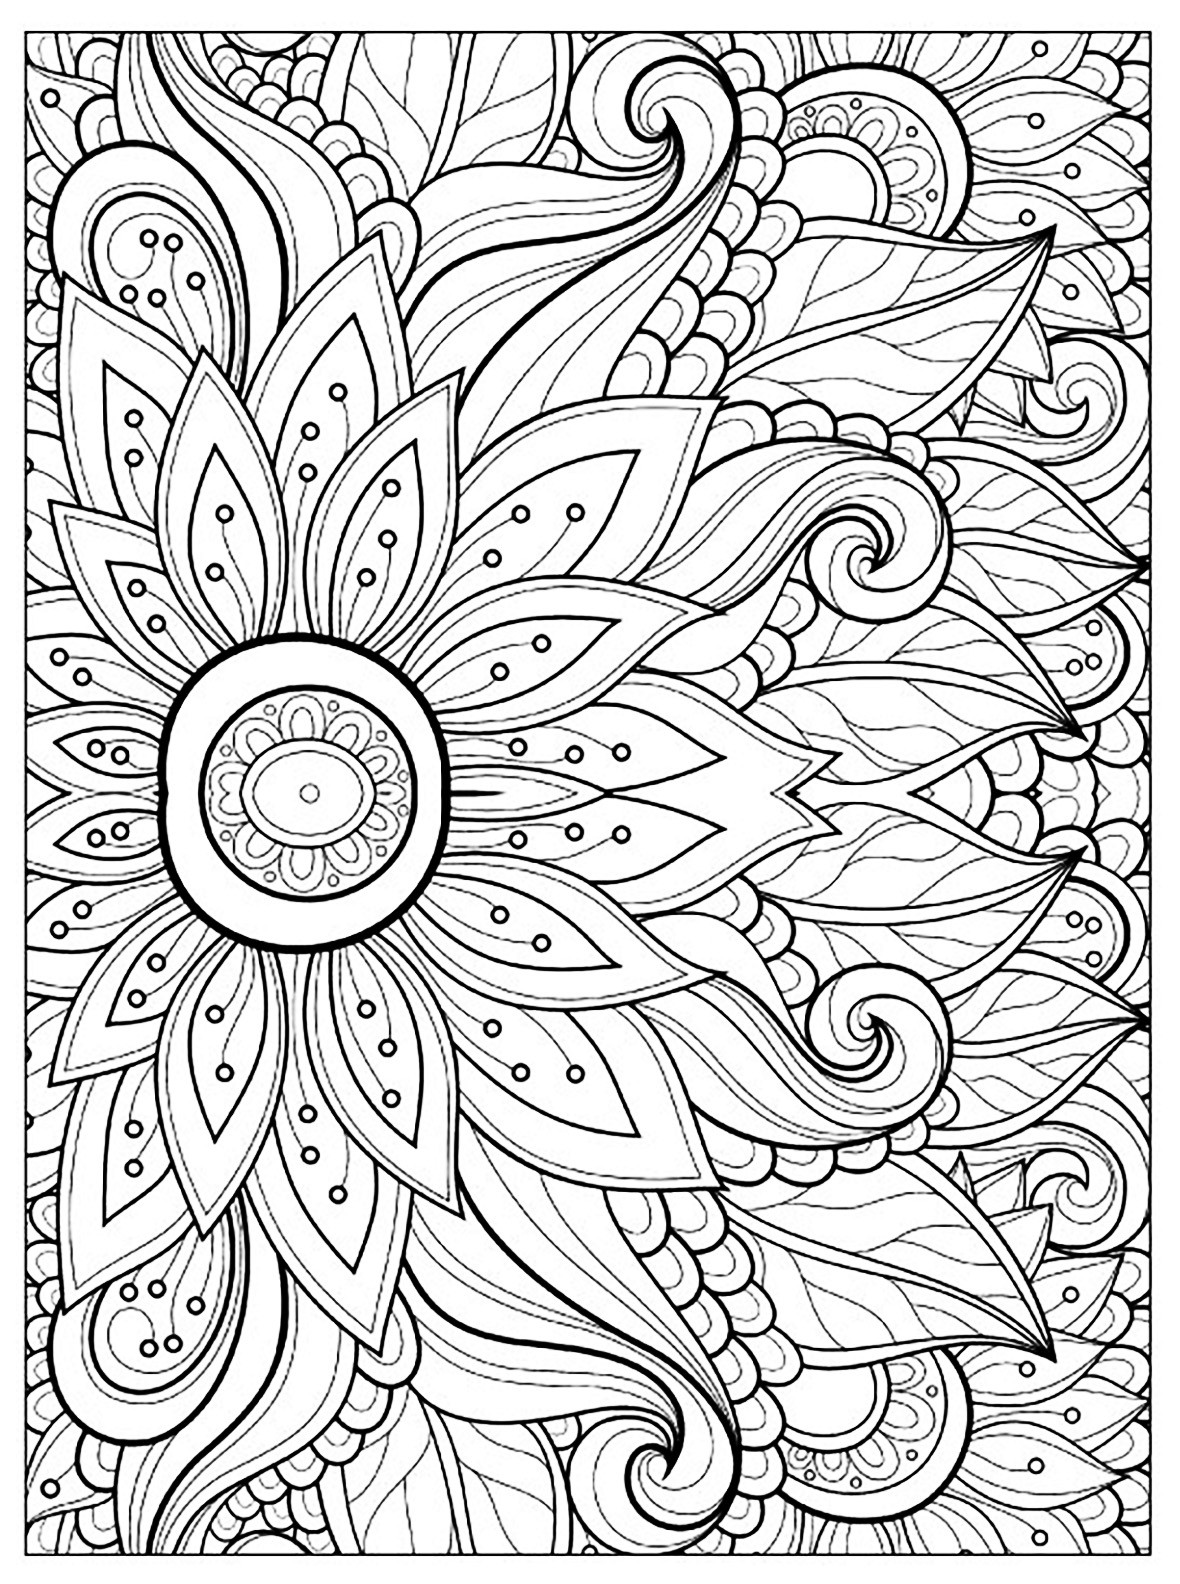 Flowers Coloring Pages For Adults
 Flower with many petals Flowers Adult Coloring Pages